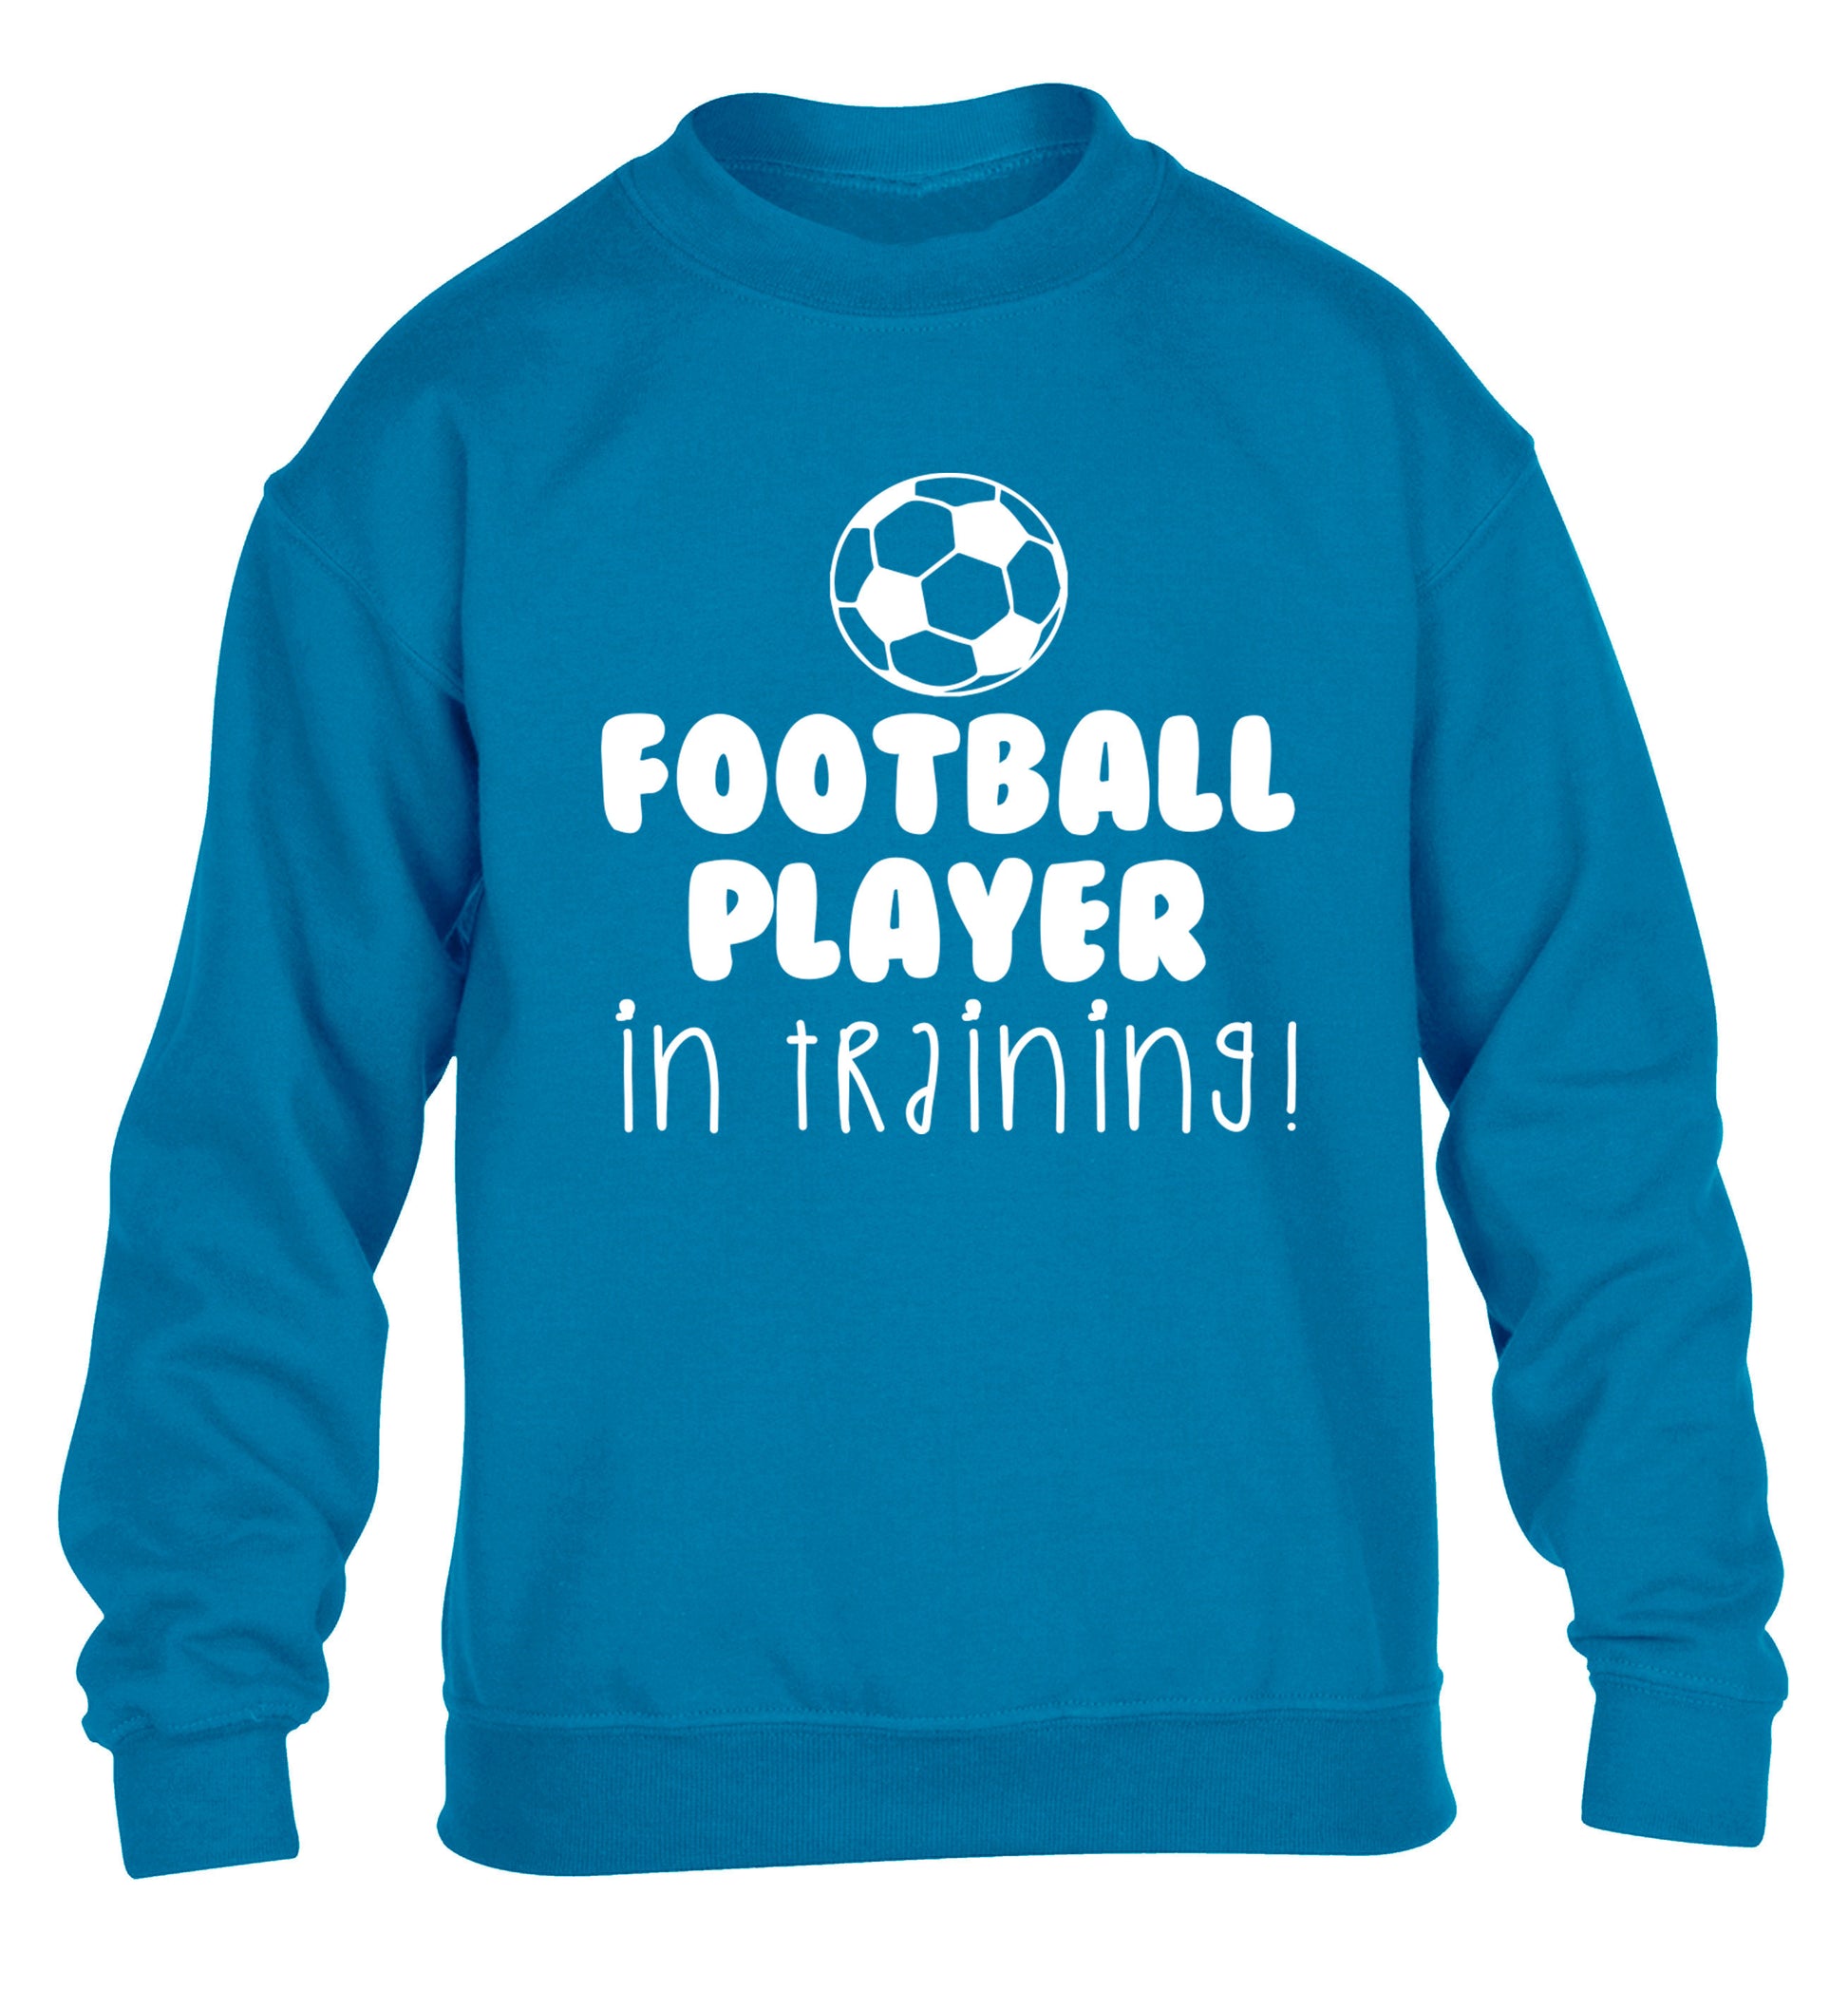 Football player in training children's blue sweater 12-14 Years